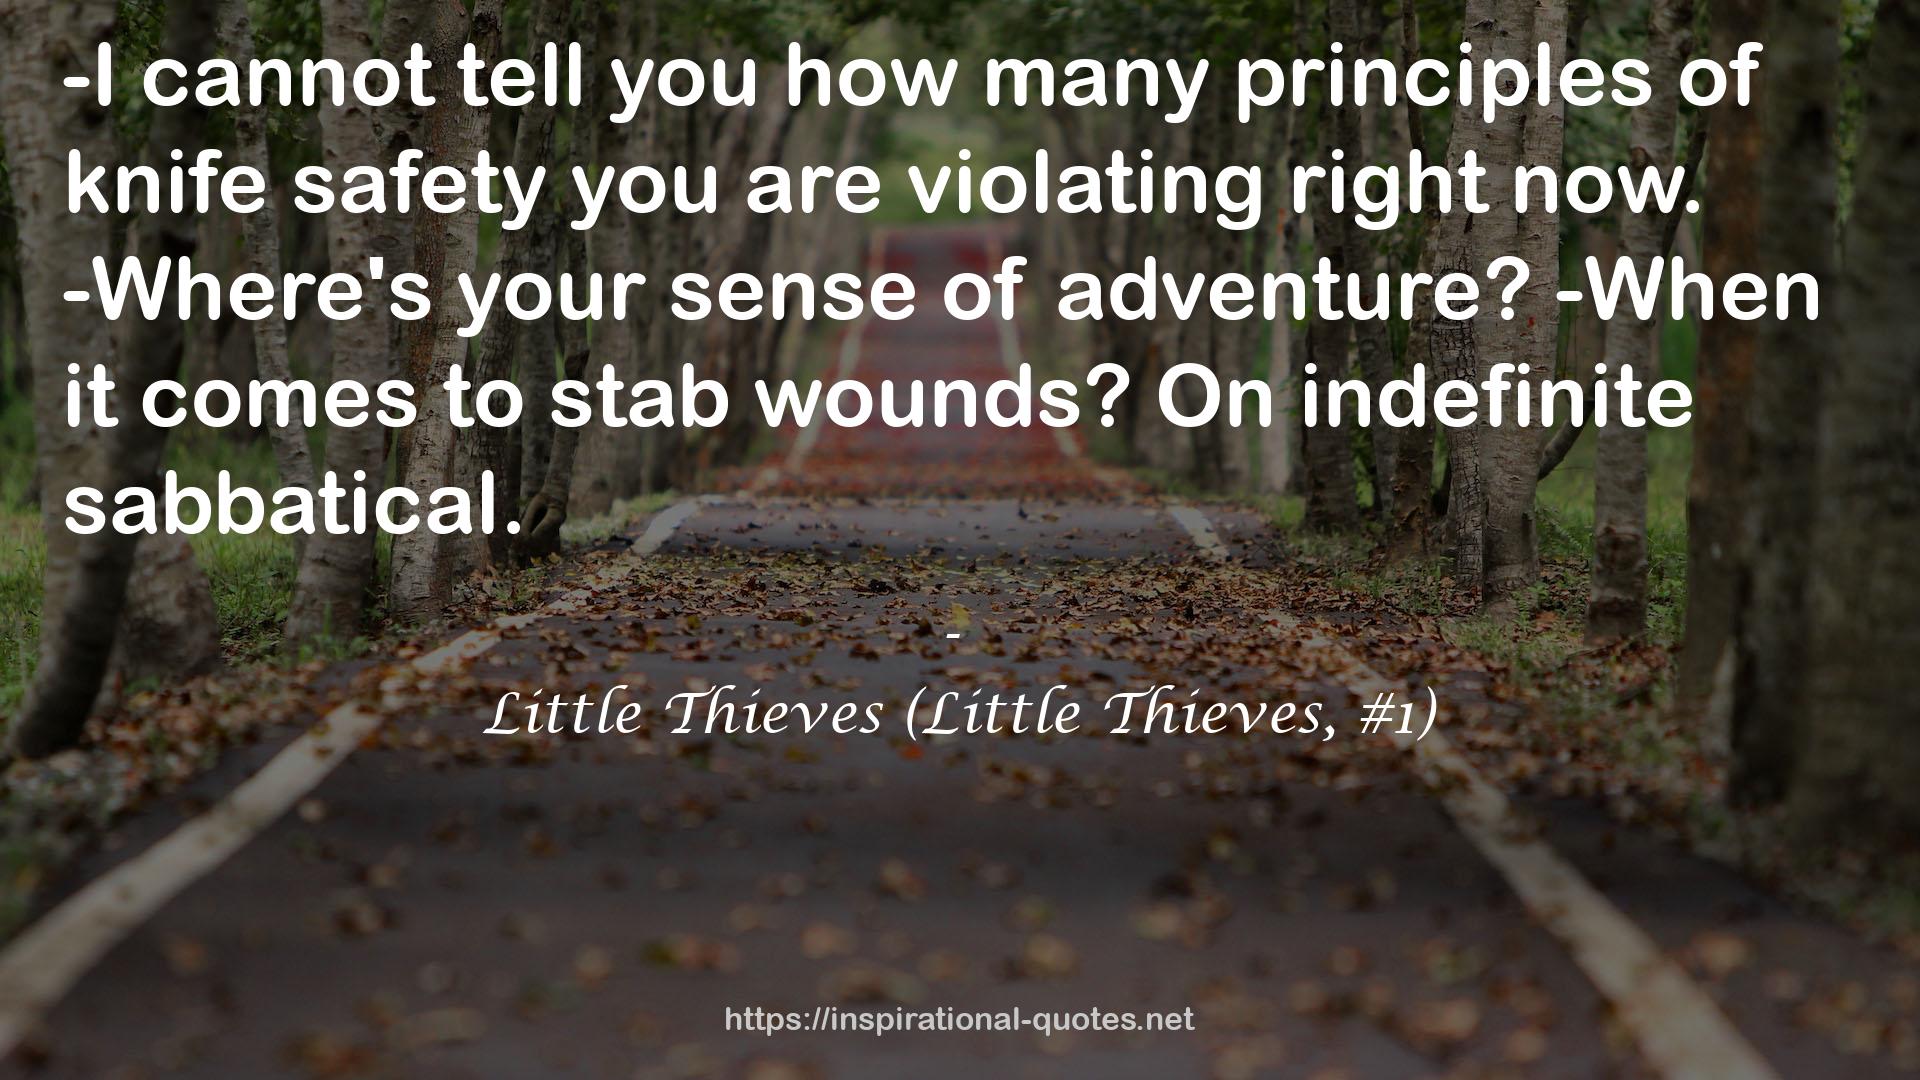 Little Thieves (Little Thieves, #1) QUOTES